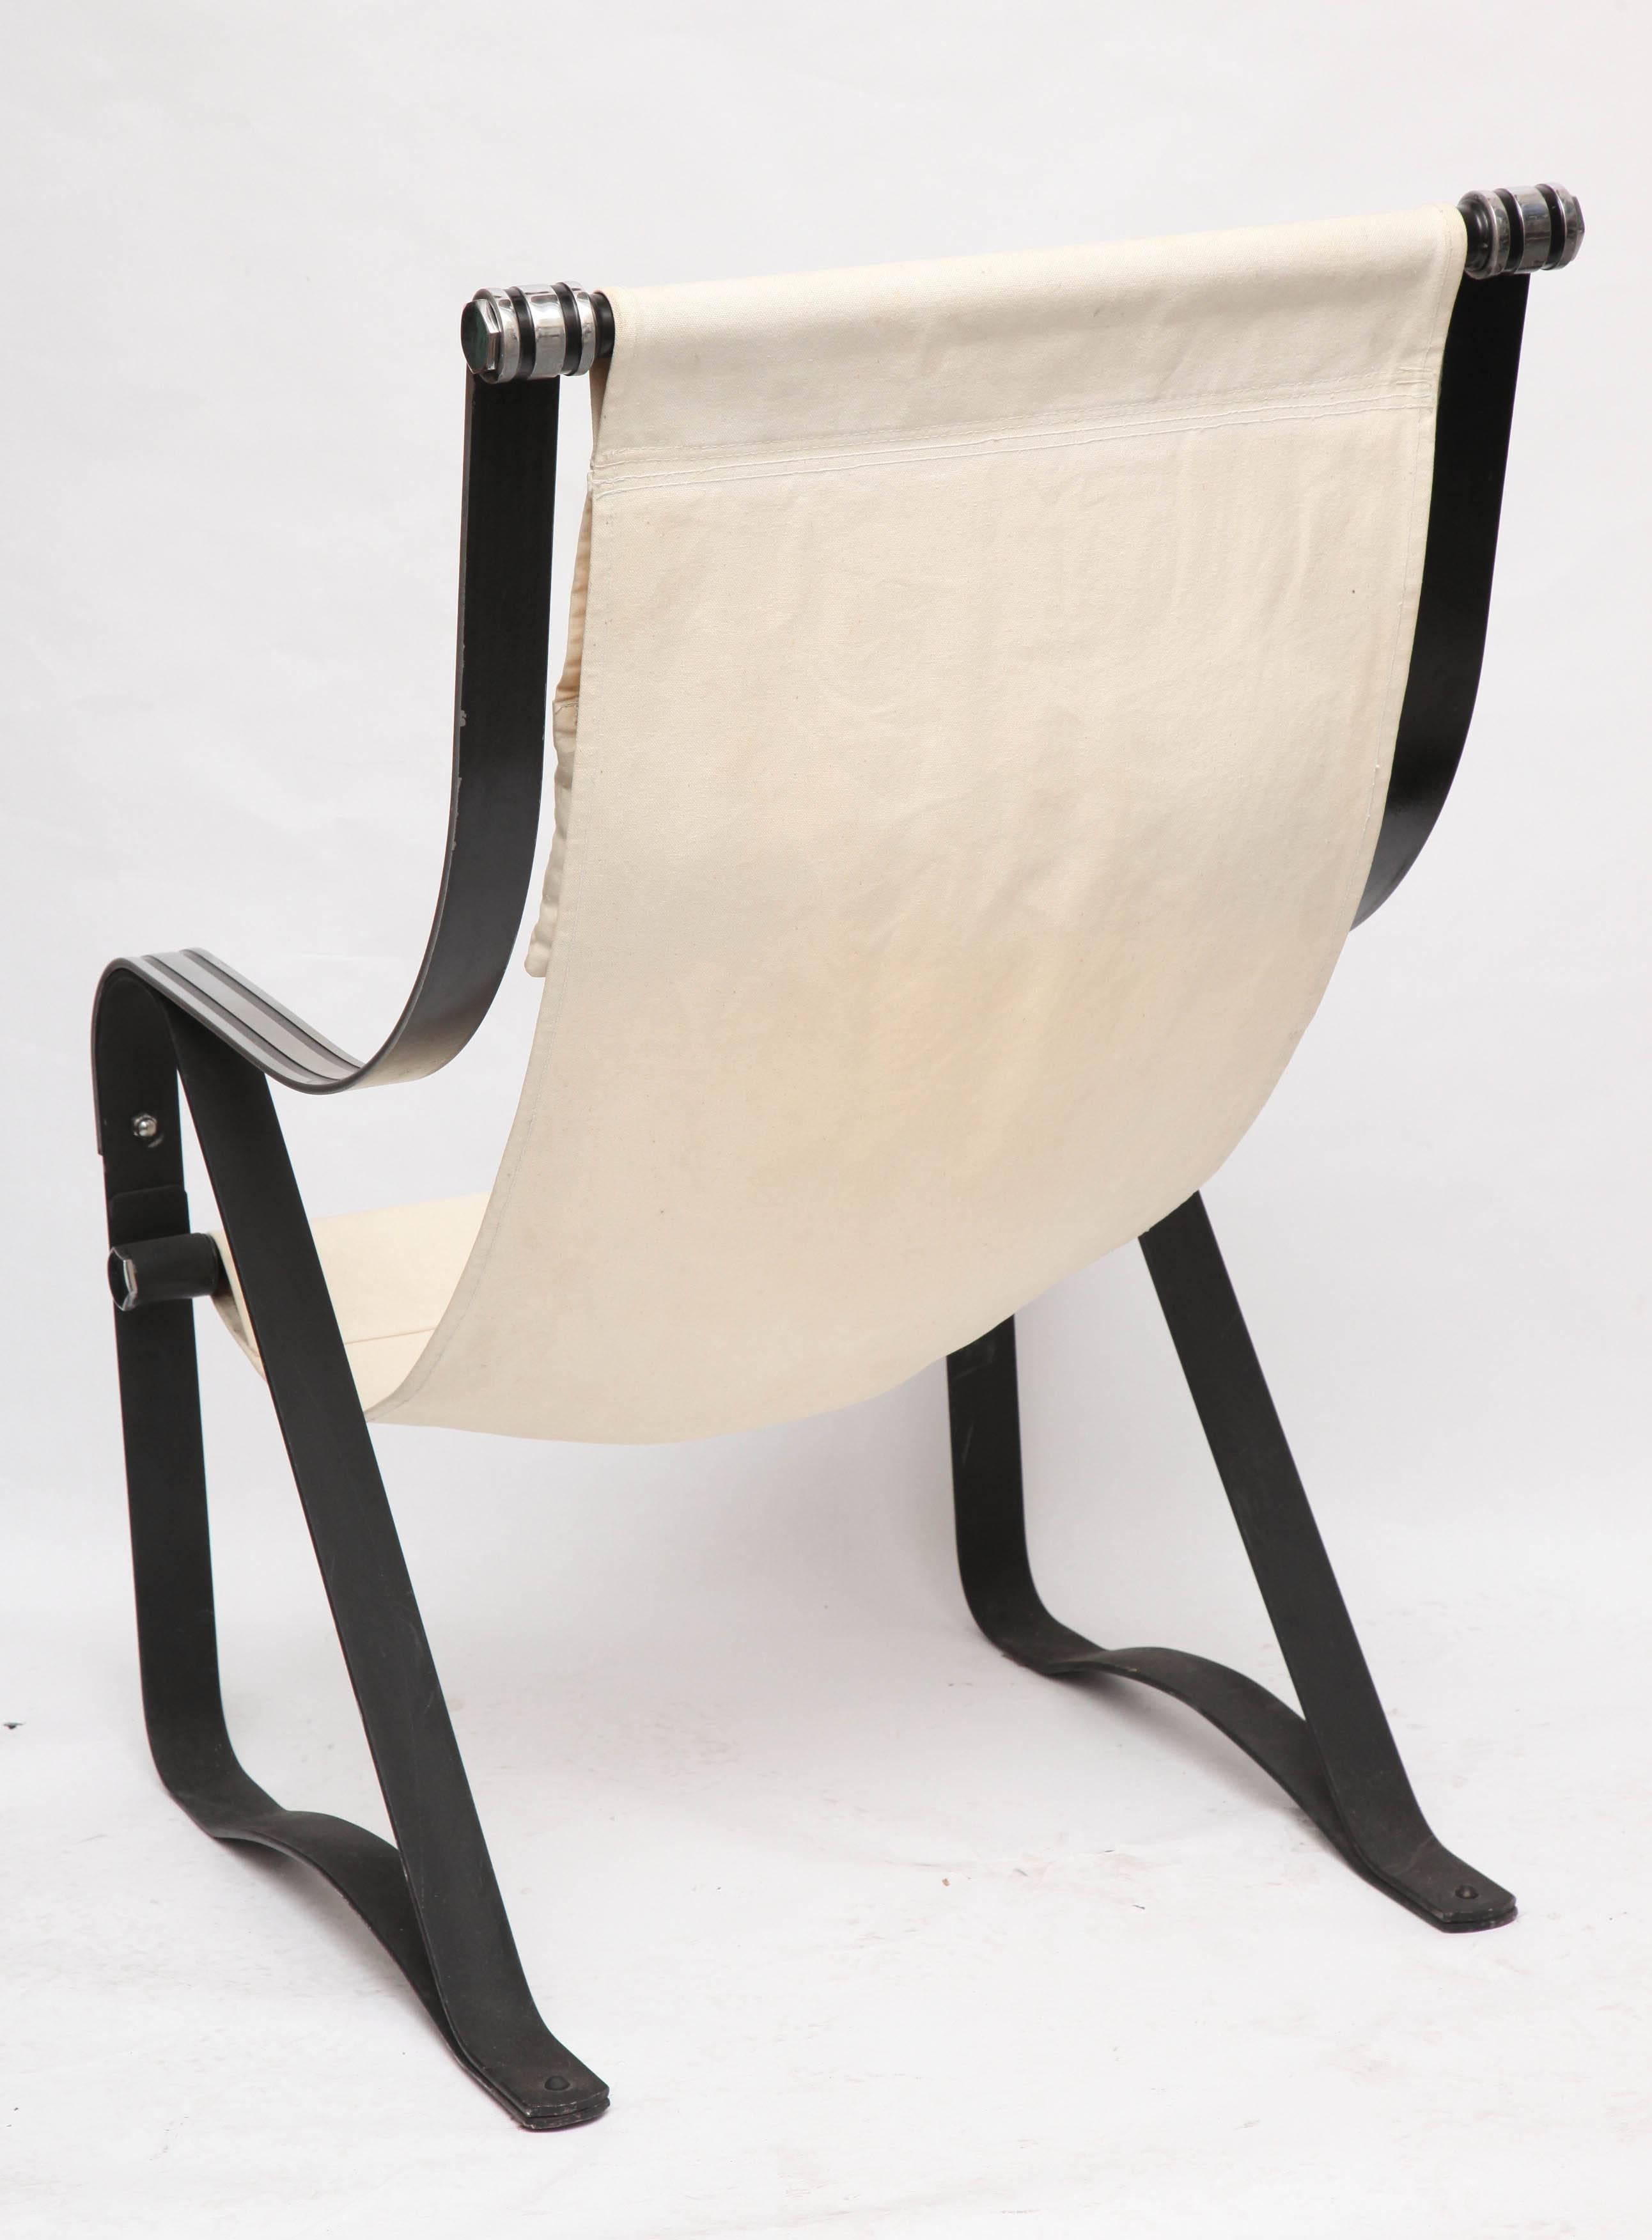 1930s American Modernist Chair by Mc Kay 1